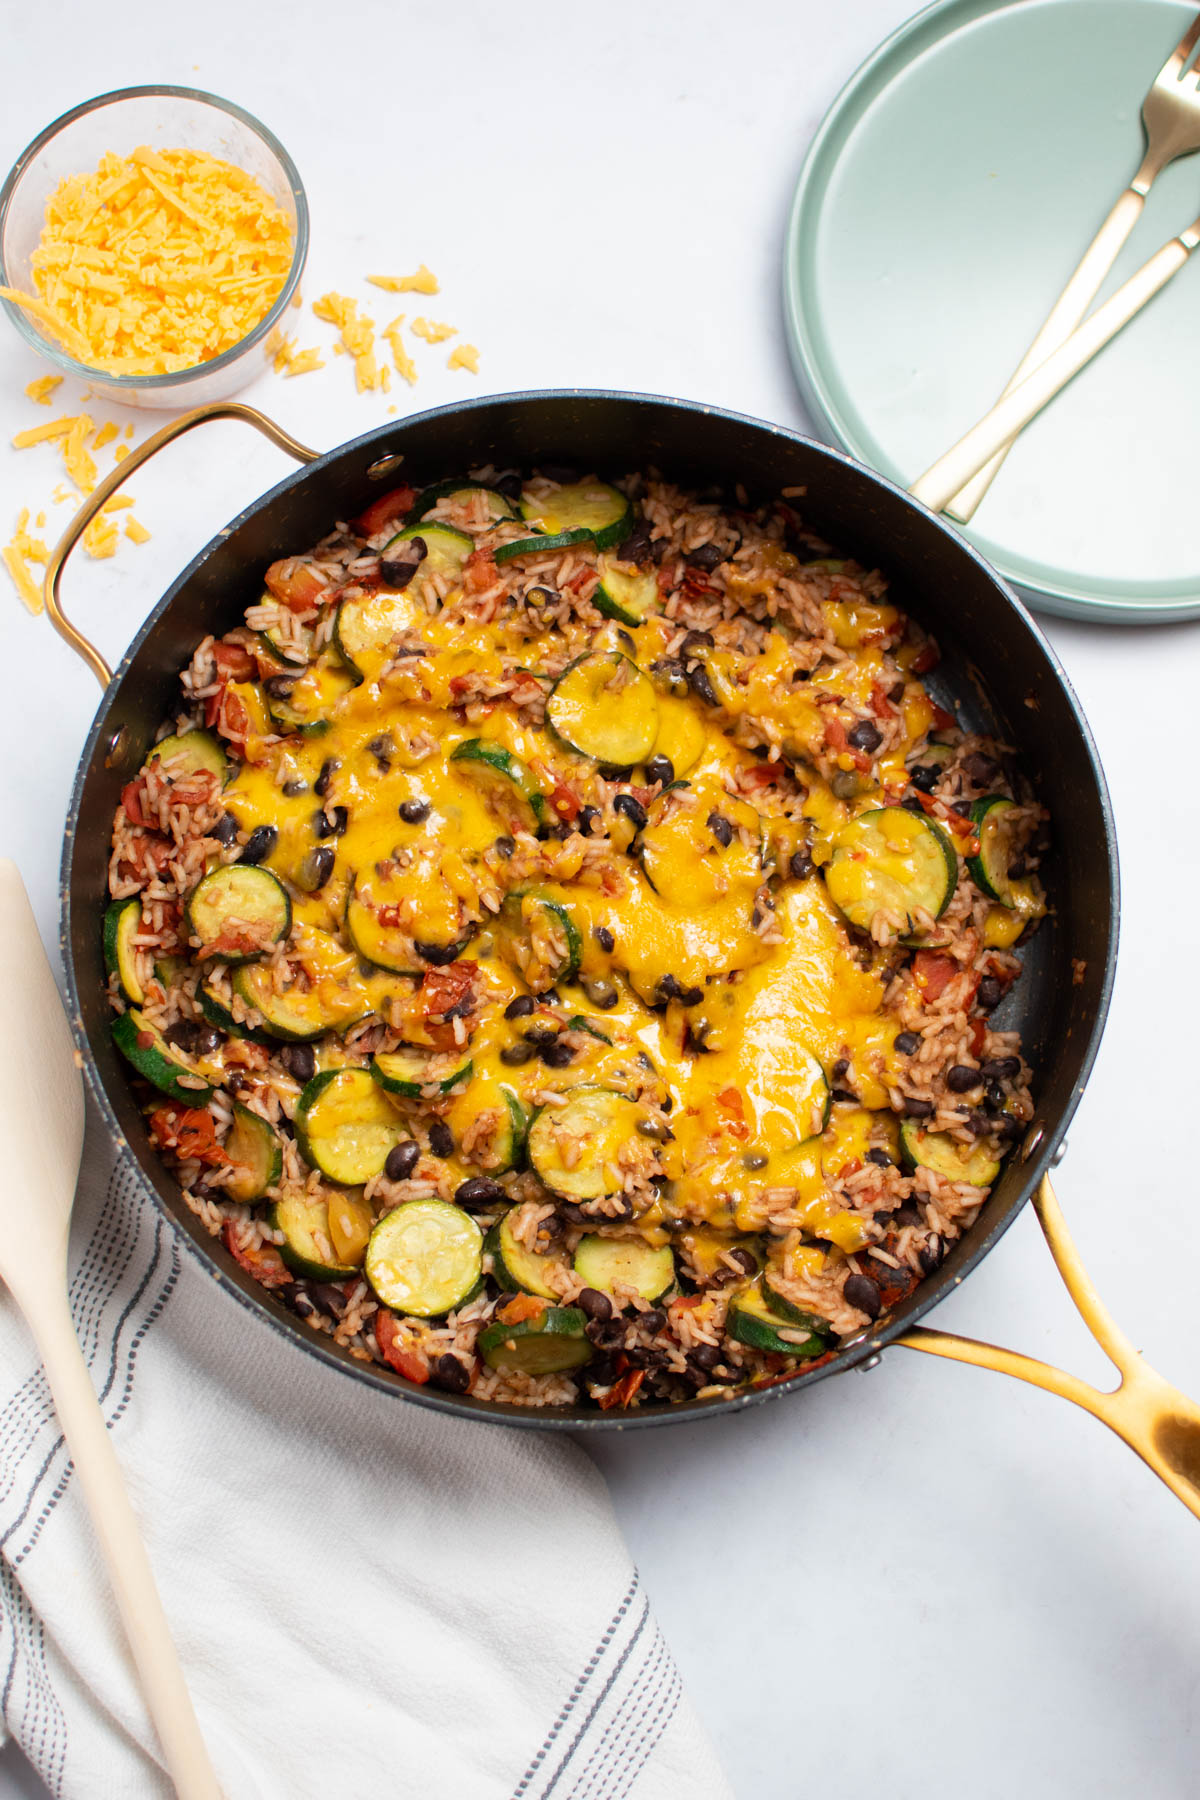 Zucchini, black bean, and rice dinner in large black skillet with plates and a towel nearby.